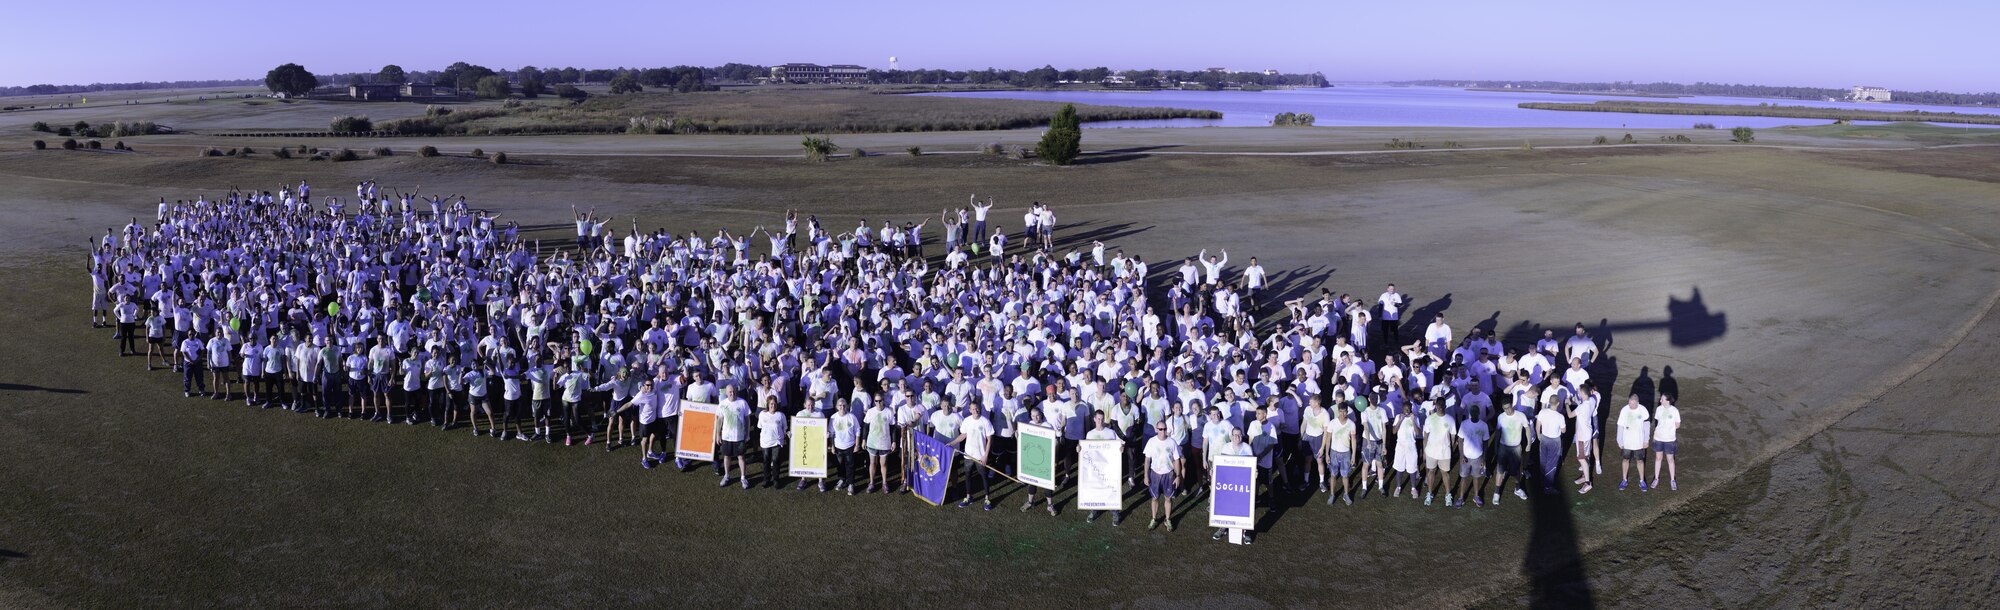 Keesler personnel pose for a group photo during the 81st Training Wing color run at the Marina Park Nov. 17, 2016, on Keesler Air Force Base, Miss. The run was one of several events held throughout Dragon Week, which focuses on resiliency and teambuilding initiatives across the base. (U.S. Air Force photo by André Askew/Released)